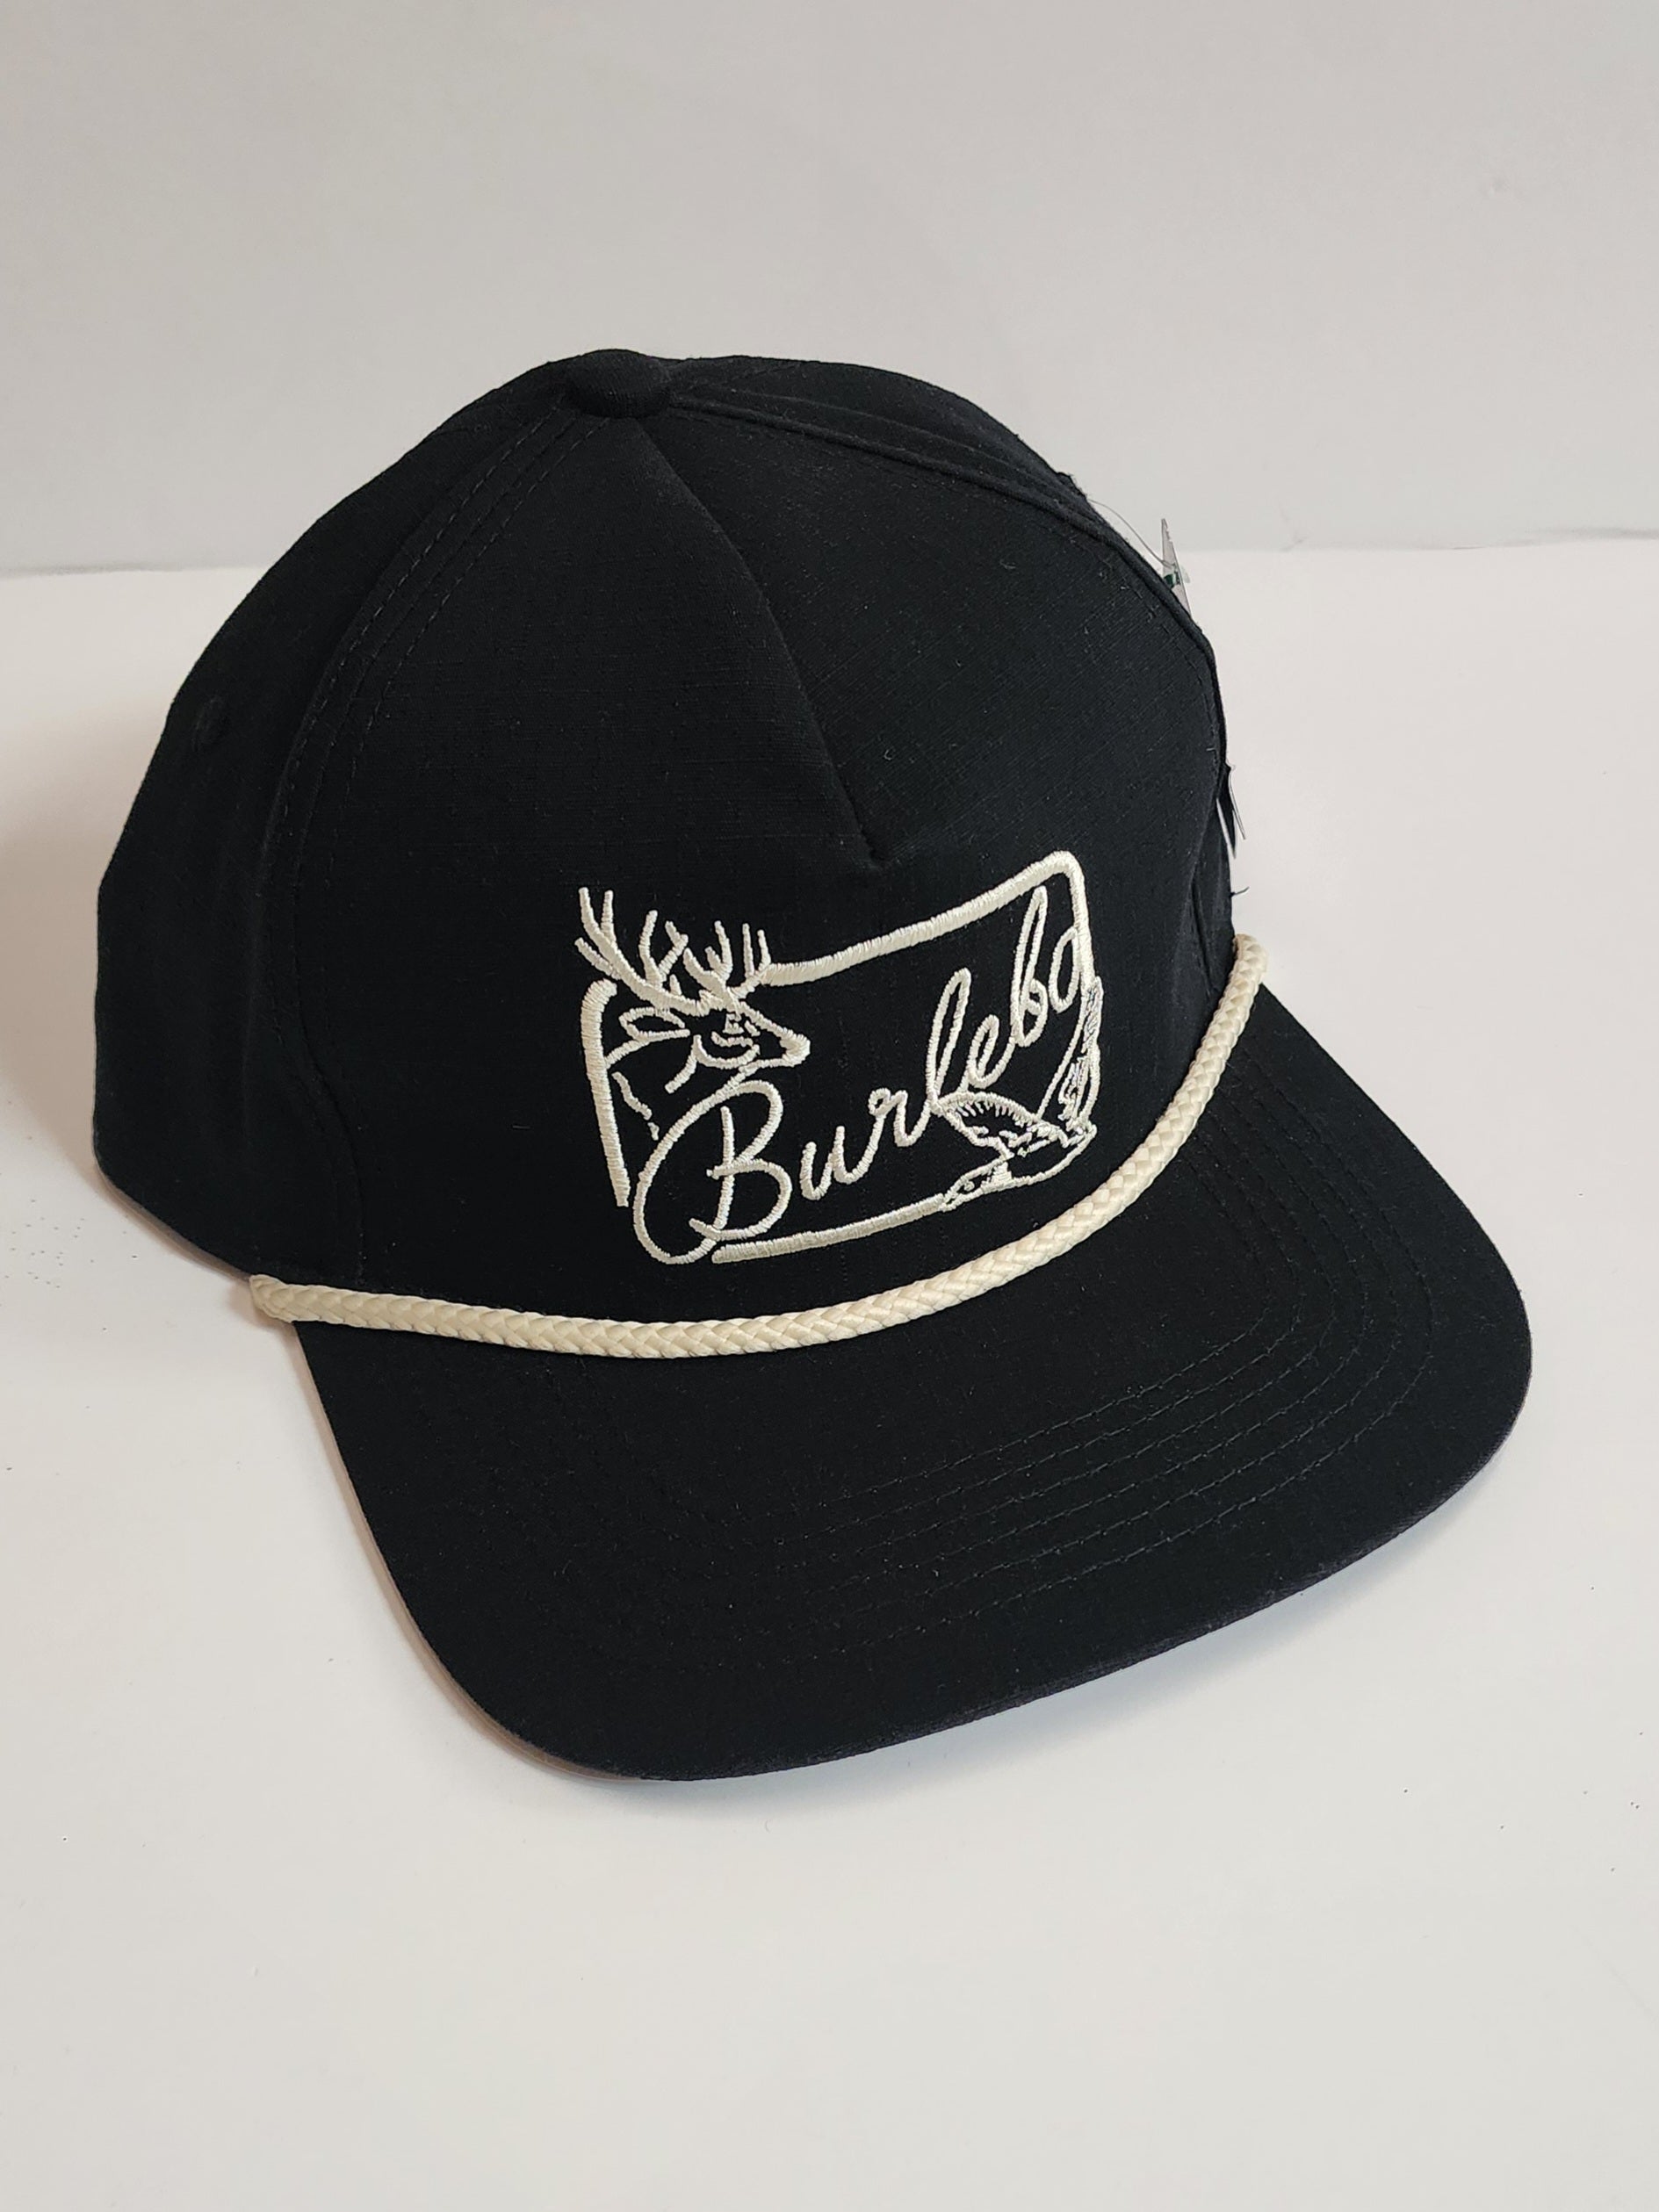 Burlebo - Black Burlebo Patch Cap - Island Tans Gift Boutique